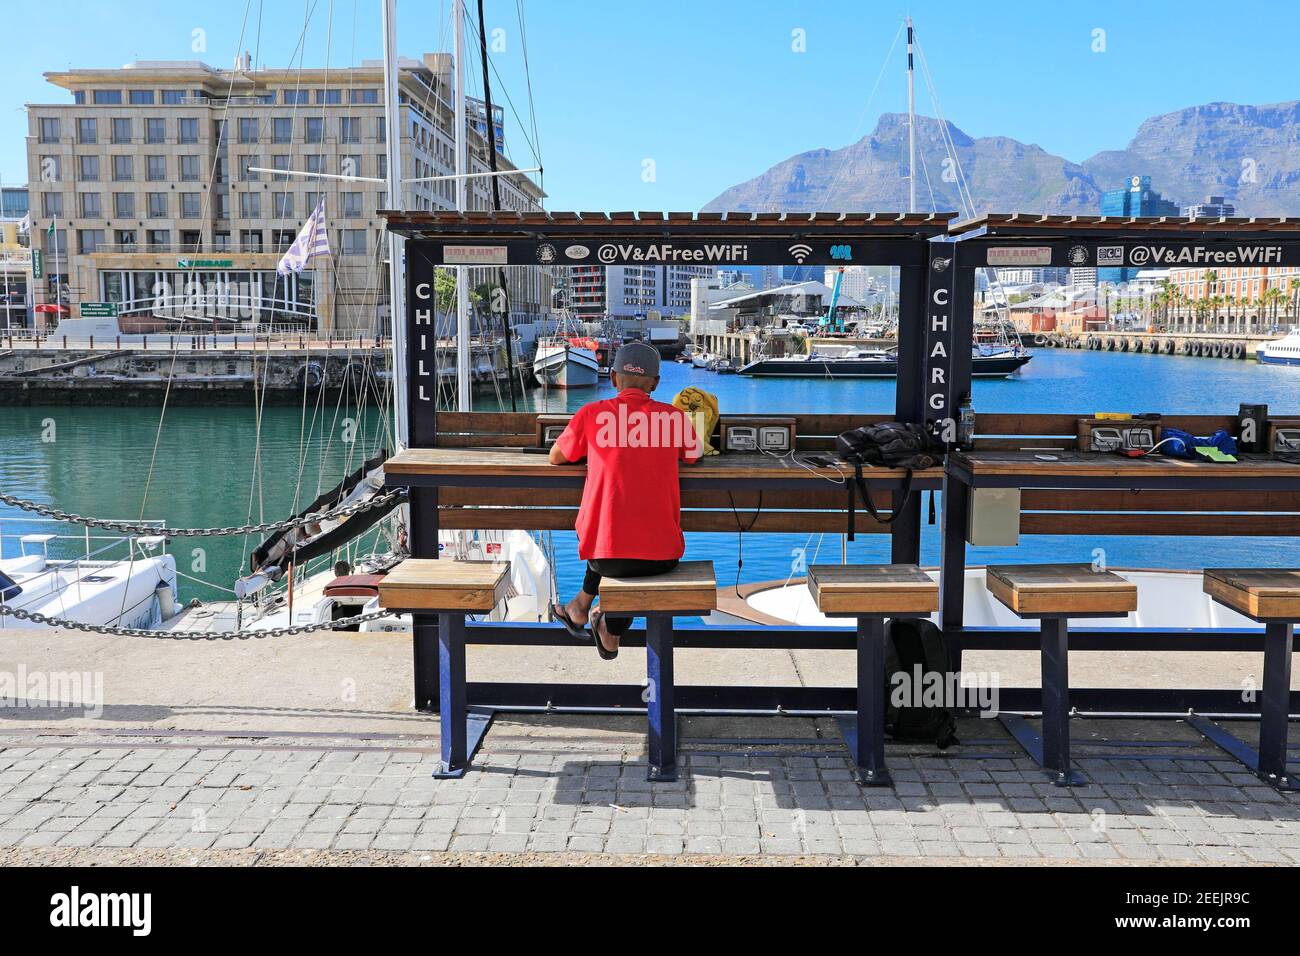 Free WiFi seating area at the V&A Waterfront, Cape Town, South Africa Stock  Photo - Alamy